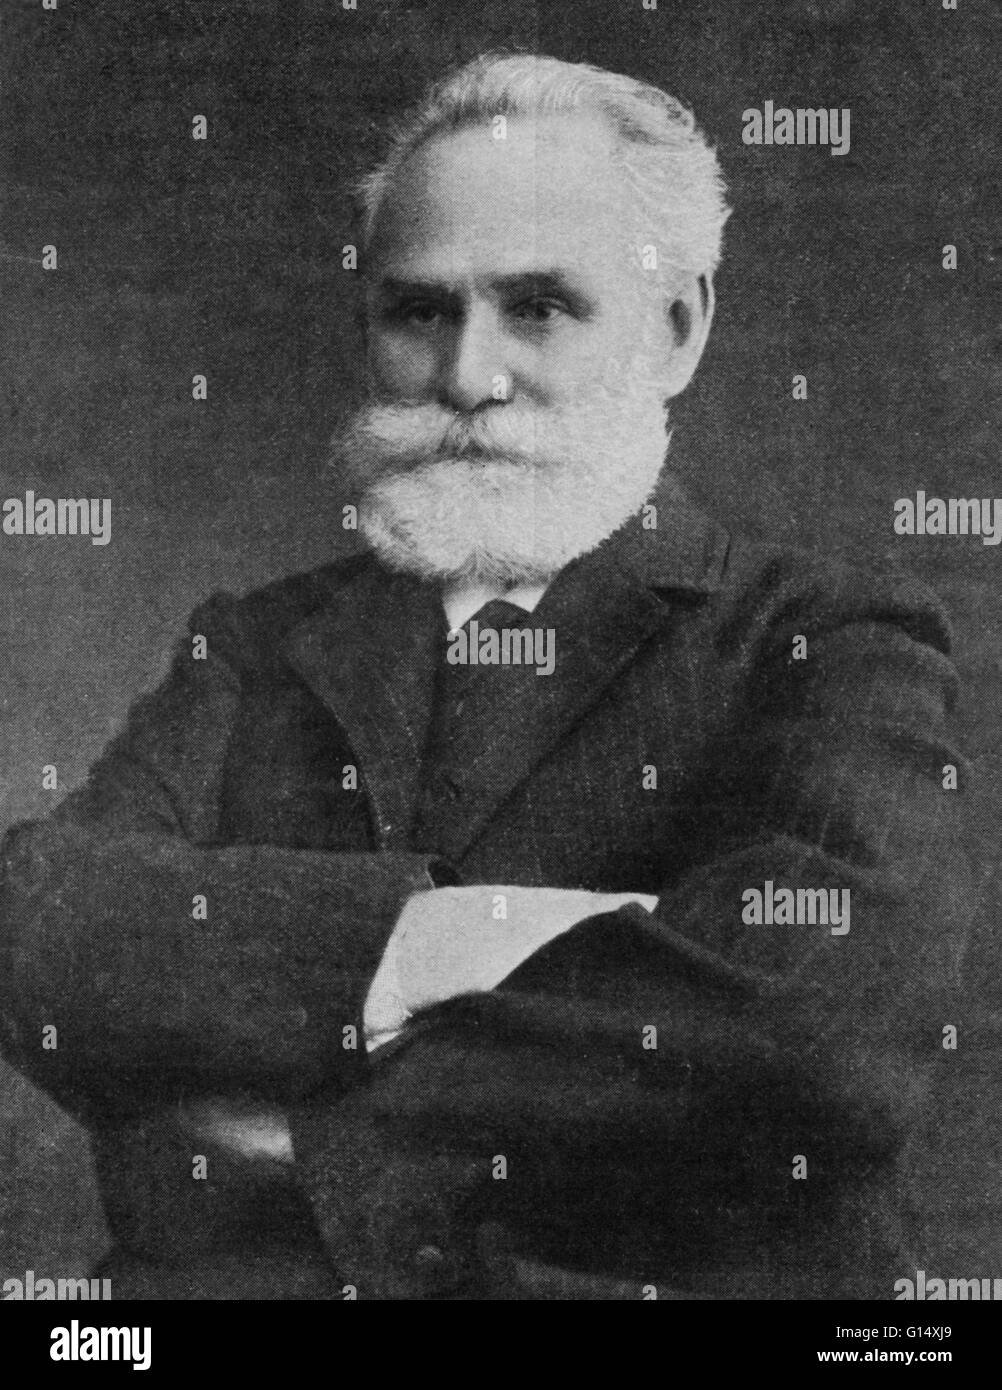 Ivan Petrovich Pavlov (1849-1936), Russian physiologist and experimental psychologist, who received the 1904 Nobel Prize for his work on the physiology of the digestive glands. He is best remembered for his work on conditioned reflexes, in which he condit Stock Photo